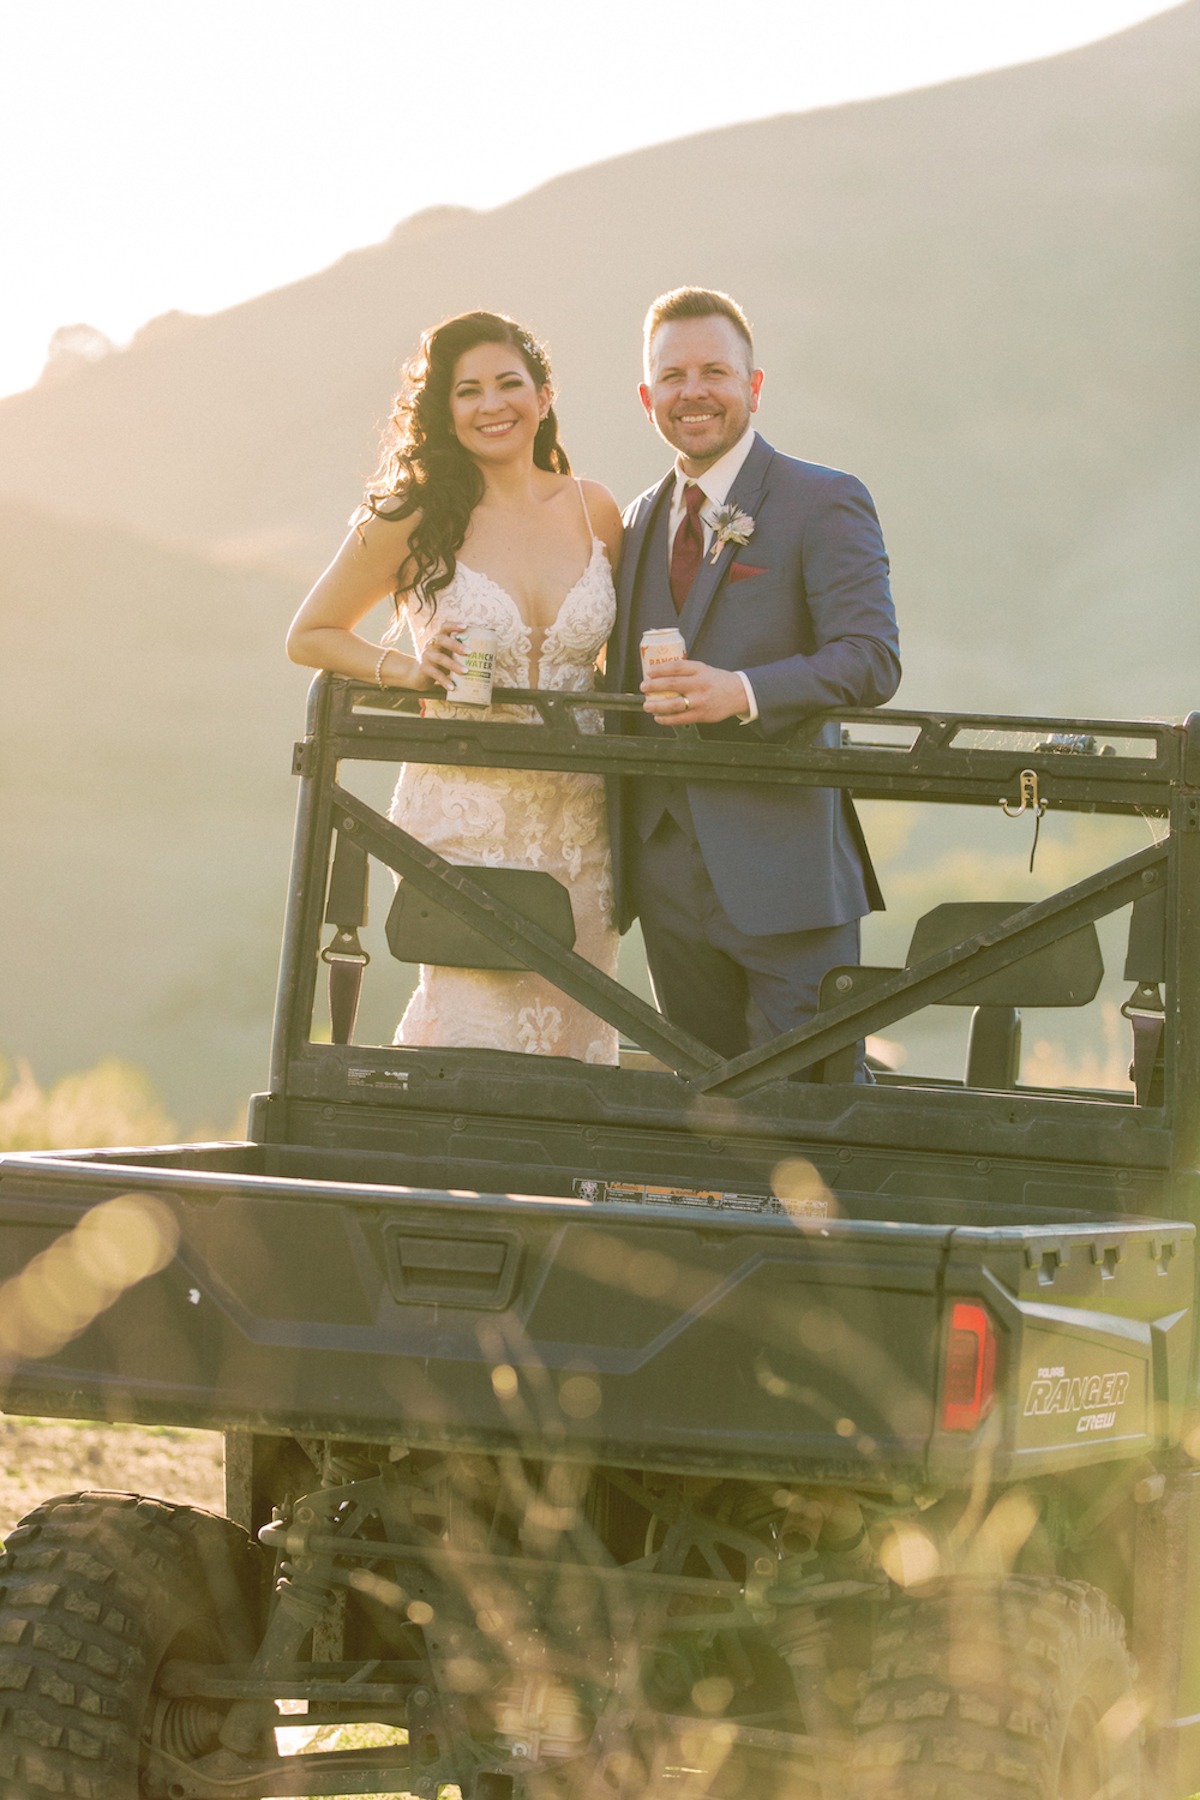 Rustic Ranch Meets Golden Hour Glamour at this Intimate $45,000 San Luis Obispo Wedding